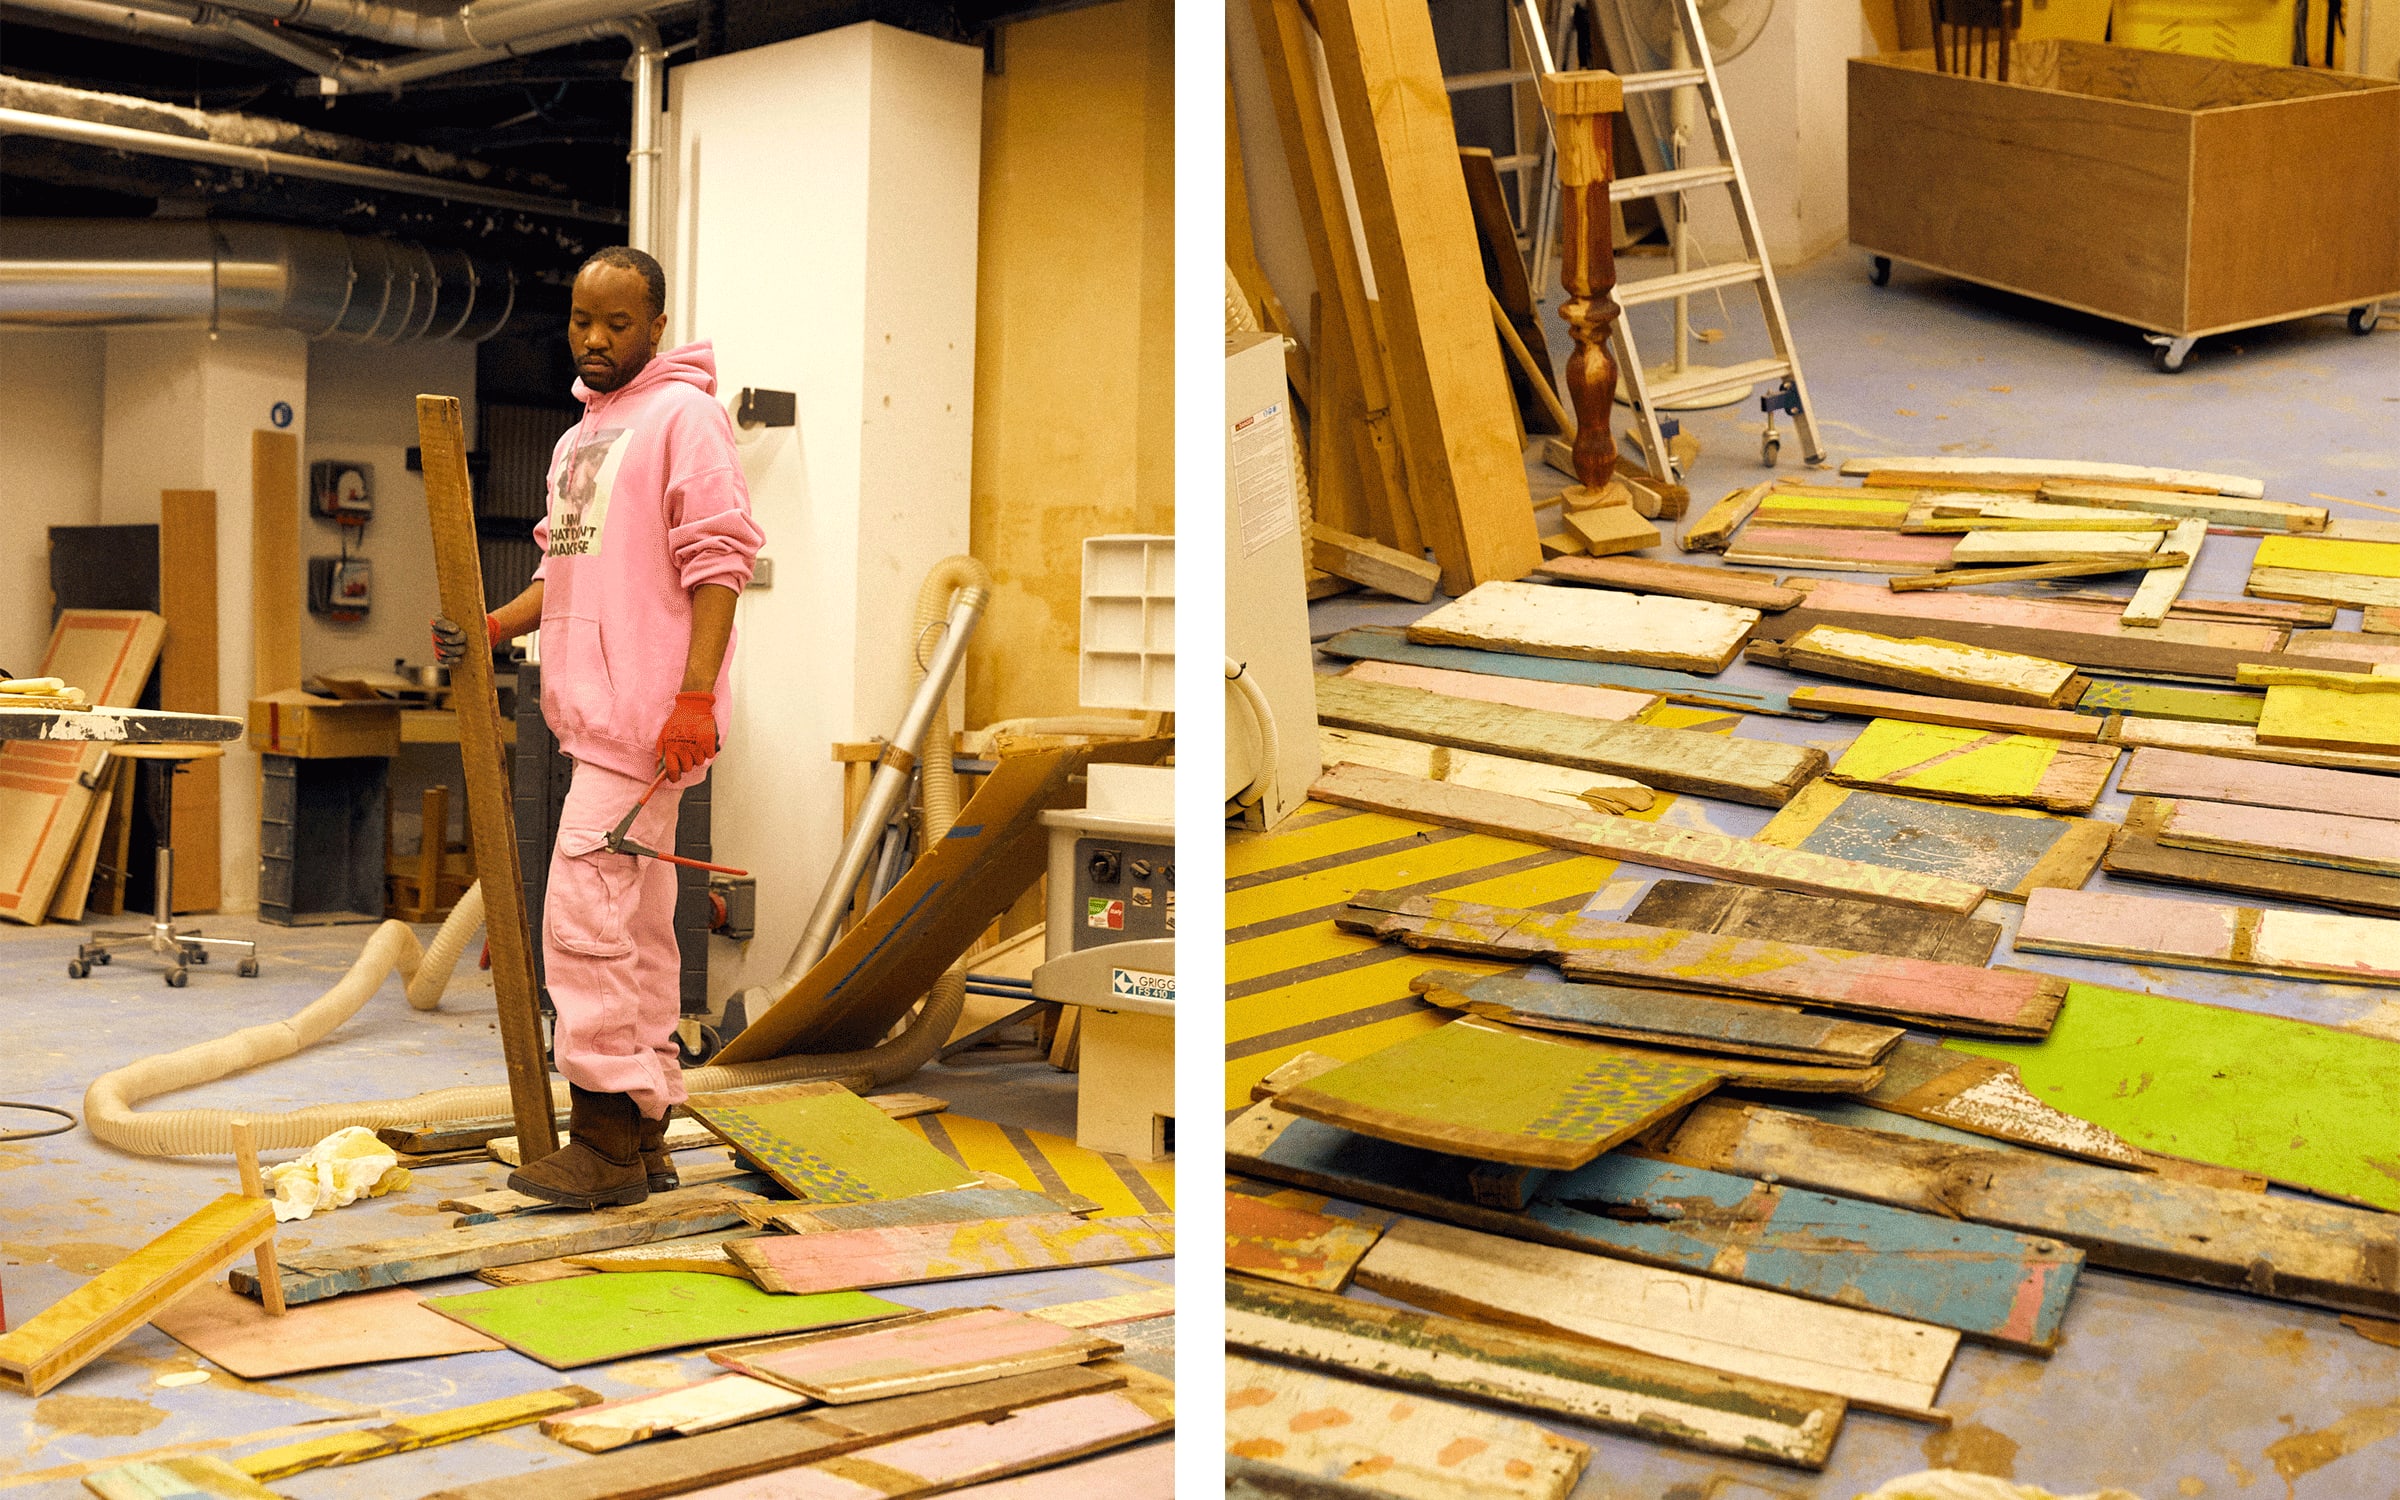 Akeem Smith in his studio in Paris. Photographs by Mathieu Richer Mamousse for Art Basel.